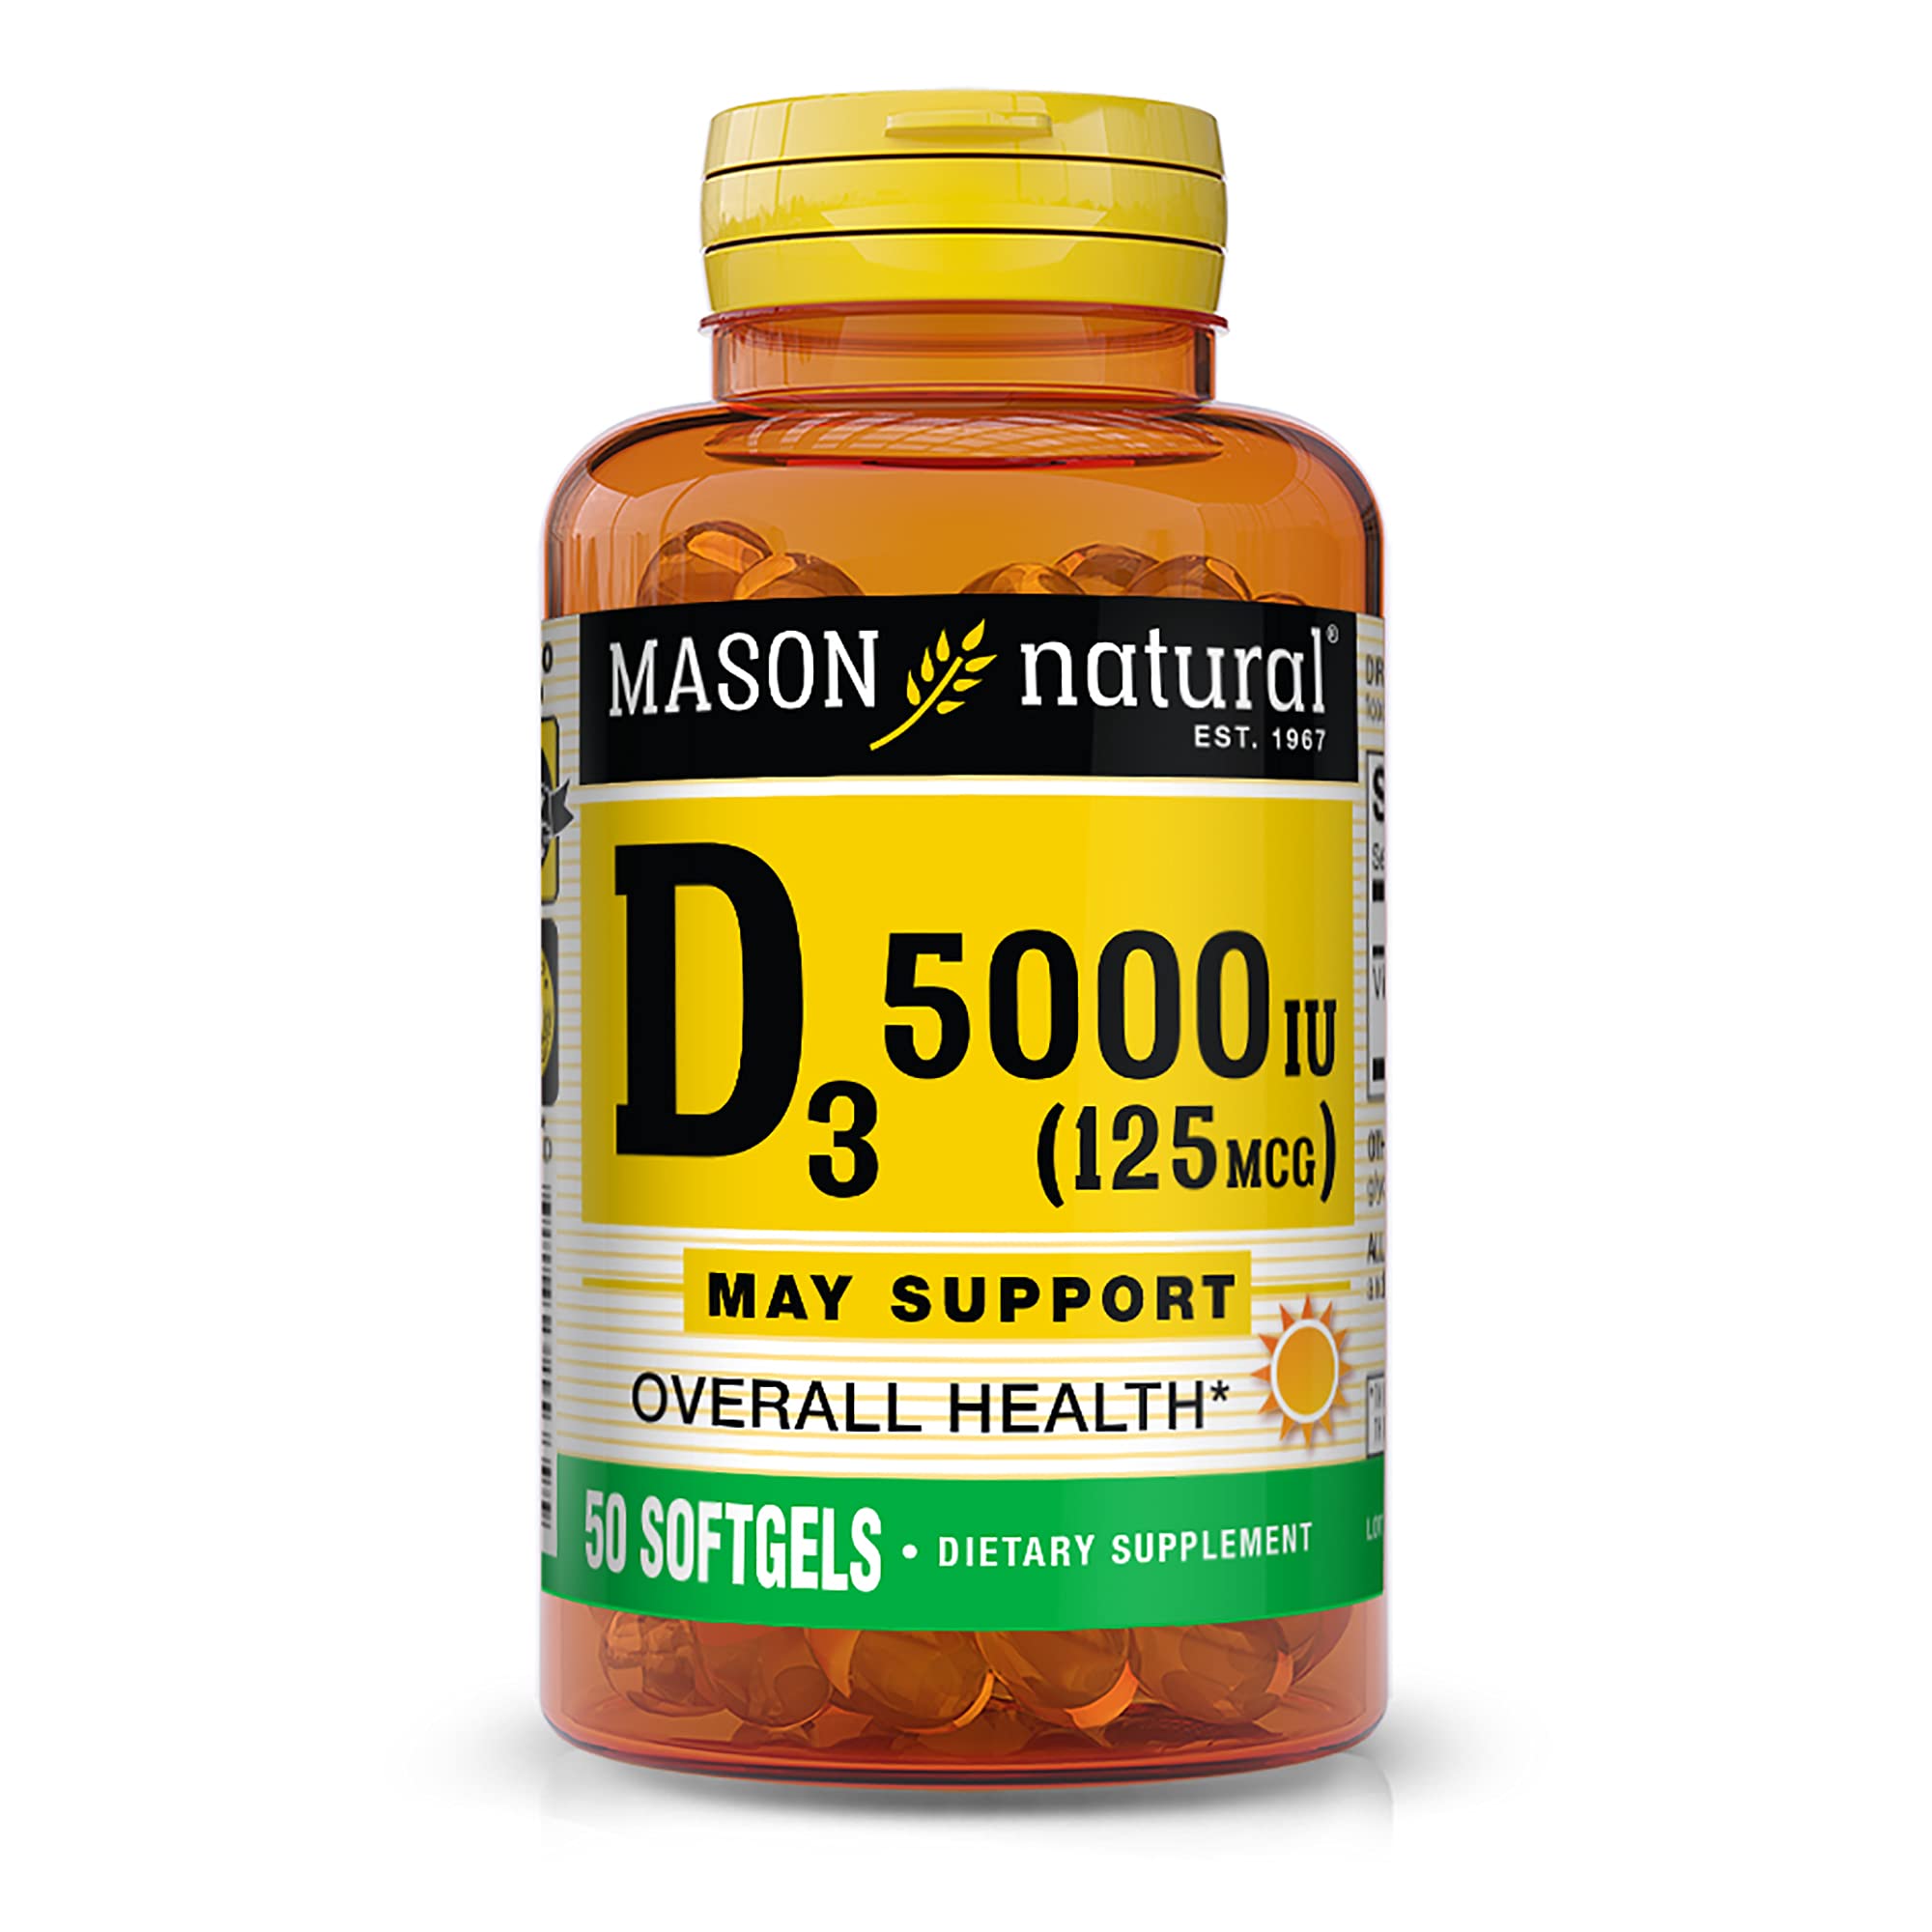 MASON NATURAL Vitamin D3 125 mcg (5000 IU) - Supports Overall Health, Strengthens Bones and Muscles, from Fish Liver Oil, 50 Softgels